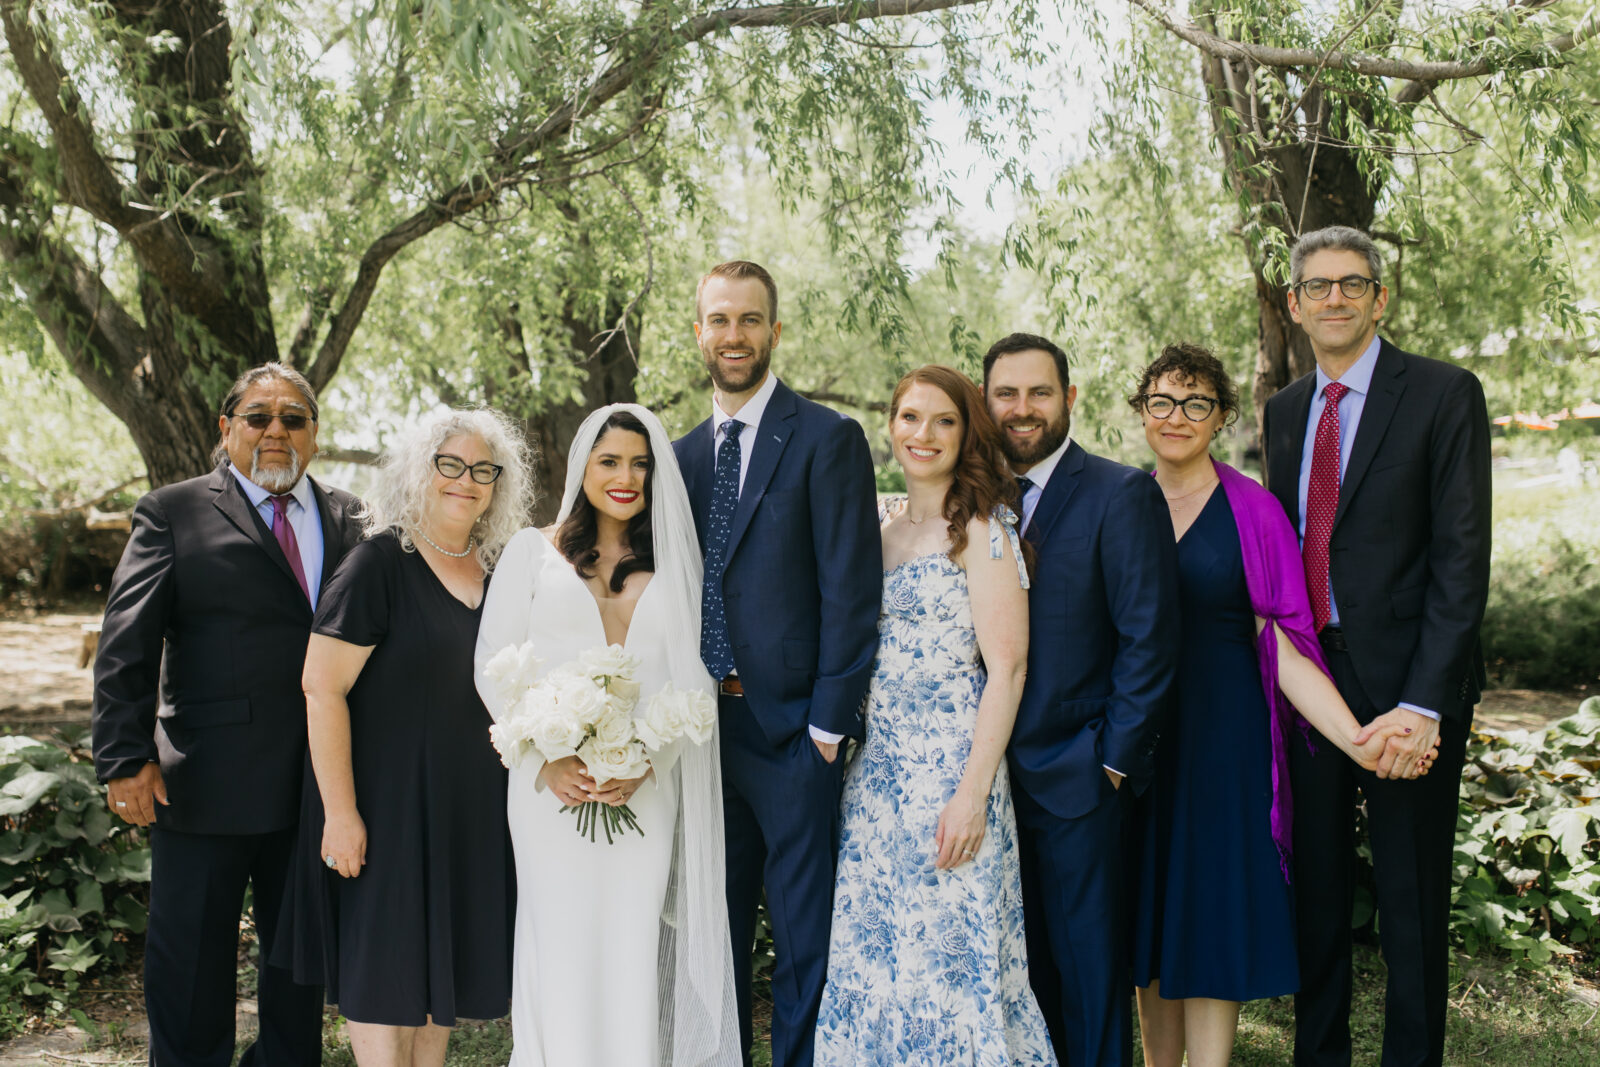 A photo of the the bride and groom's respective families during their wedding day